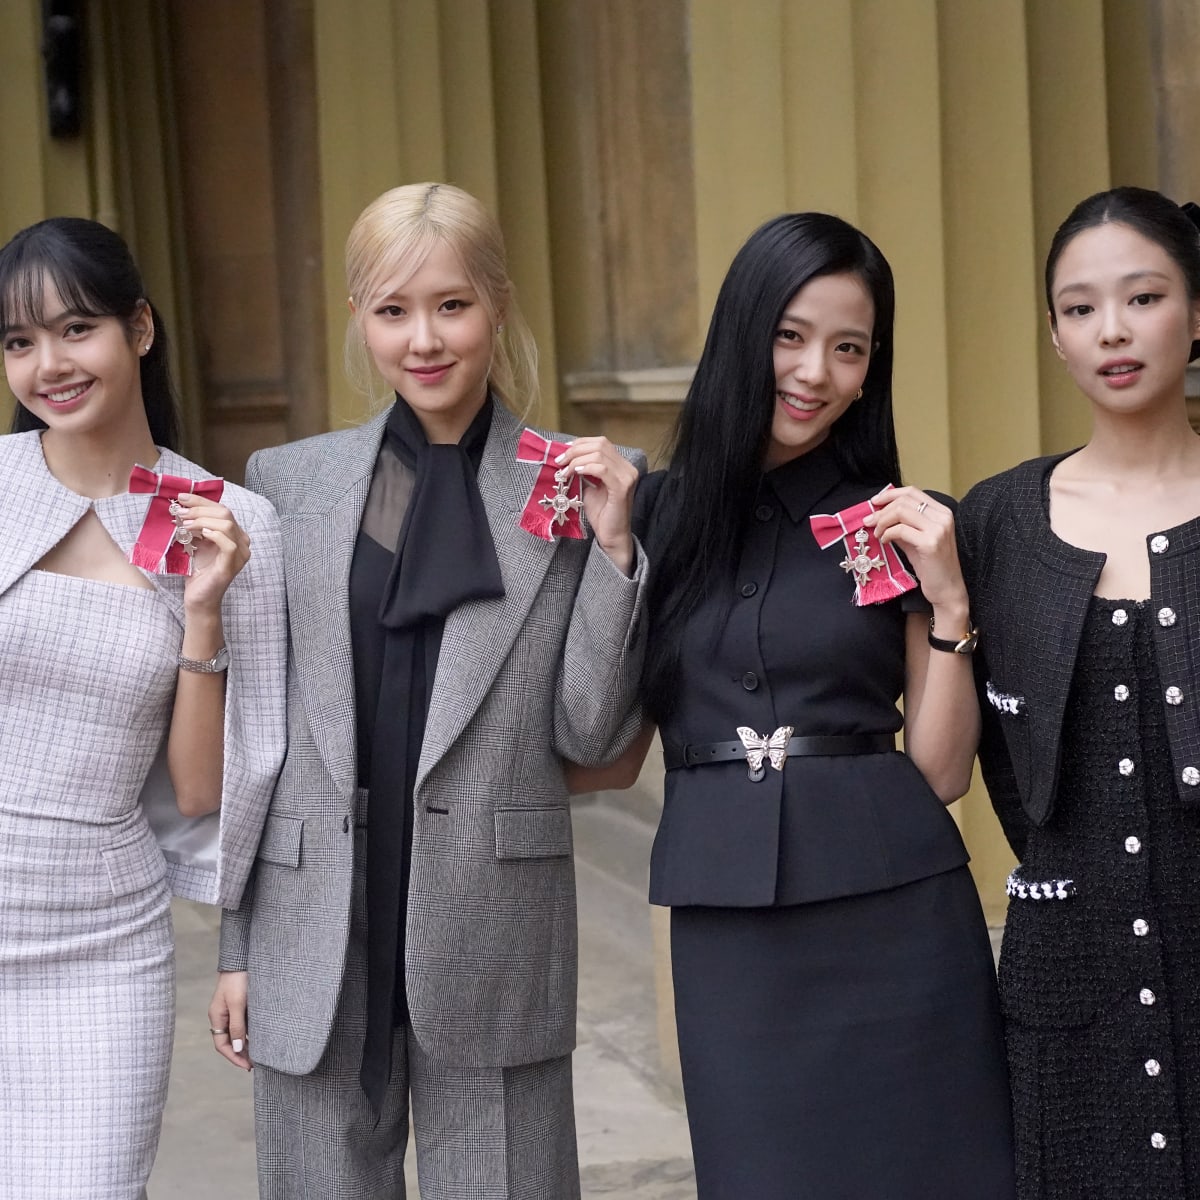 Blackpink Put on Their Most Regal Suiting to Become MBEs - Fashionista